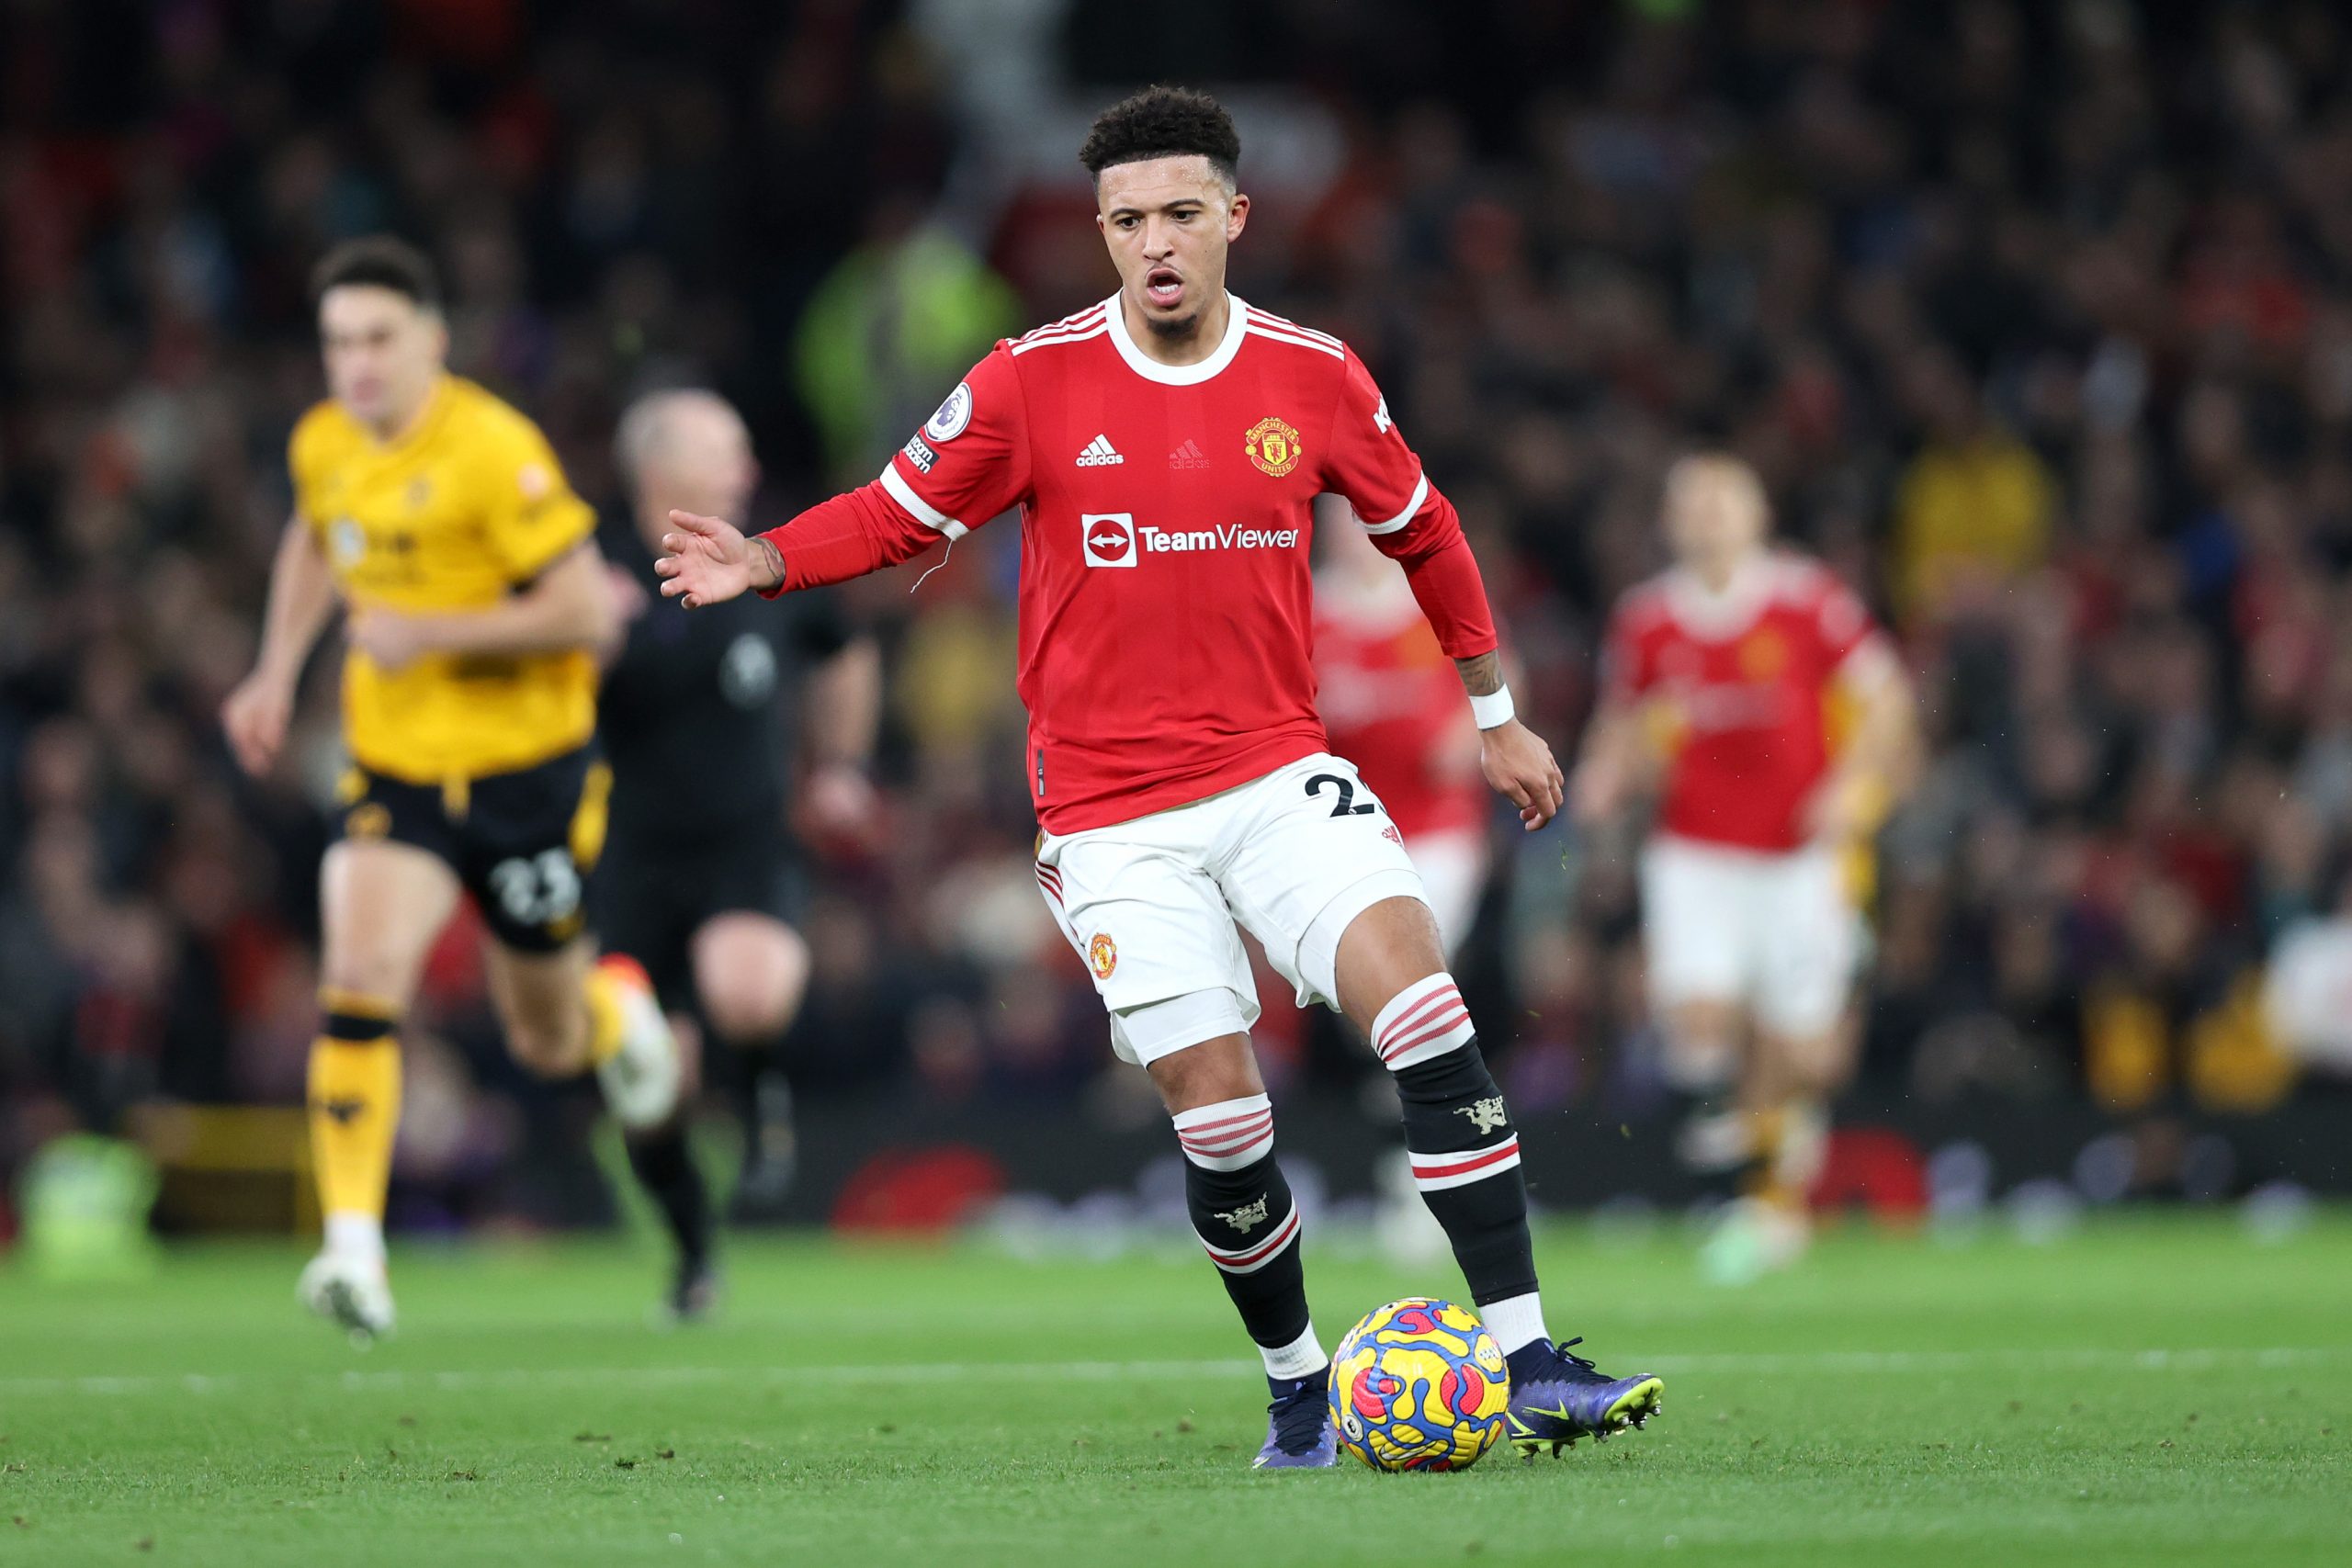 Jadon Sancho has found his feet recently at Man United. (Photo by Clive Brunskill/Getty Images)